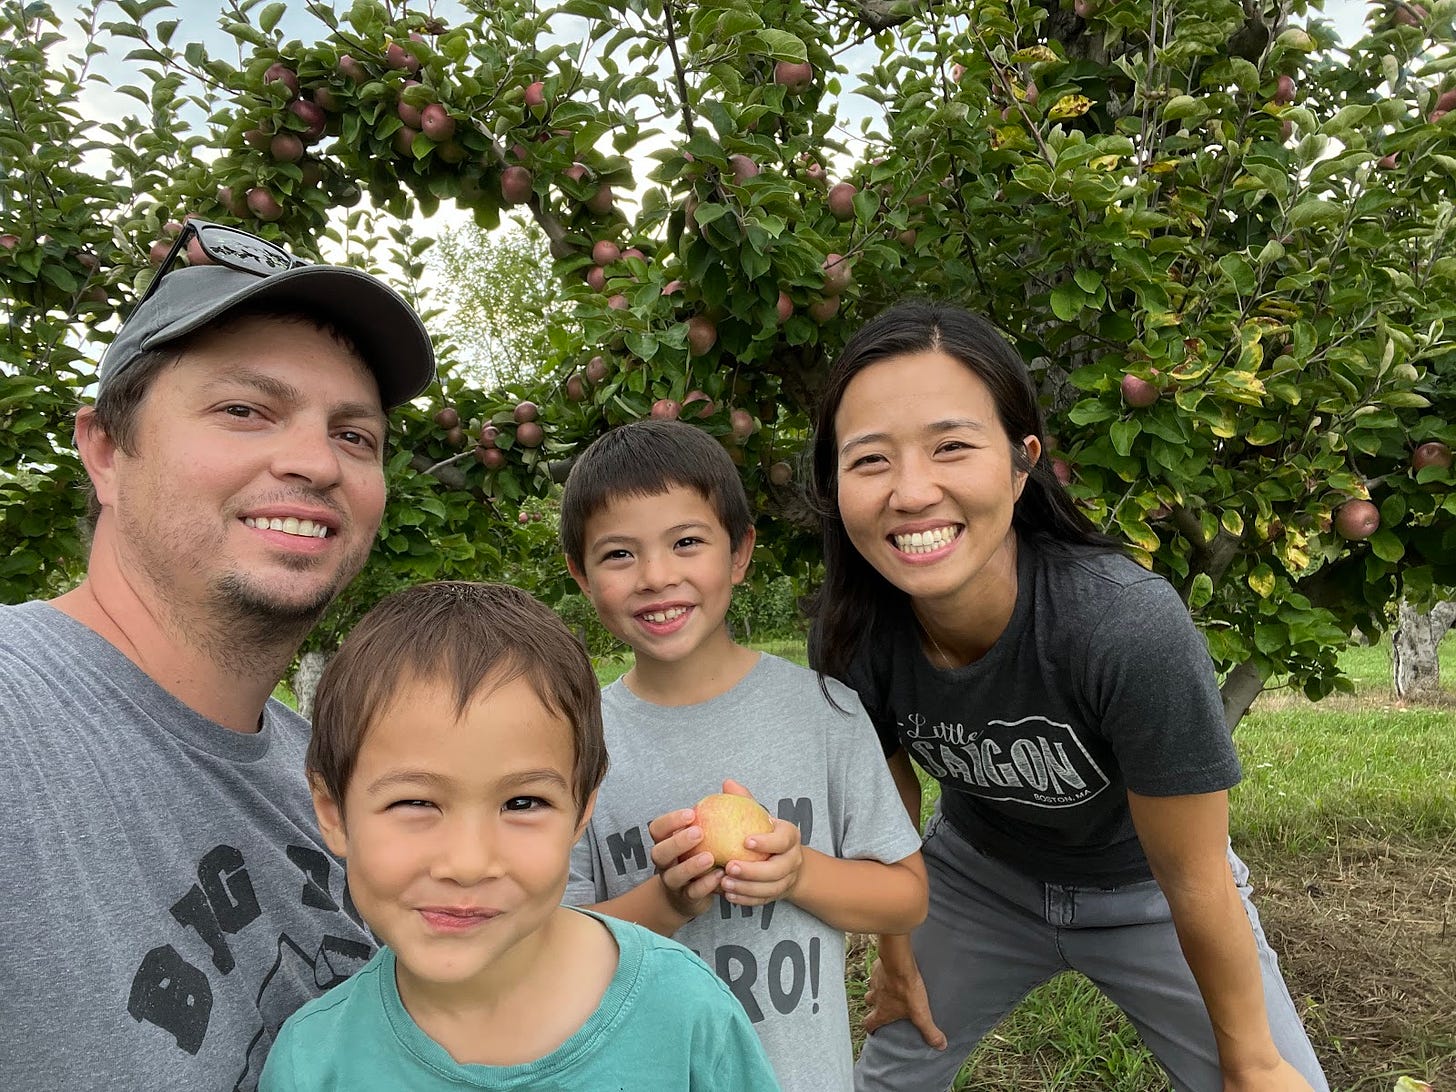 Michelle and the family smile for a selfie at the apple orchard